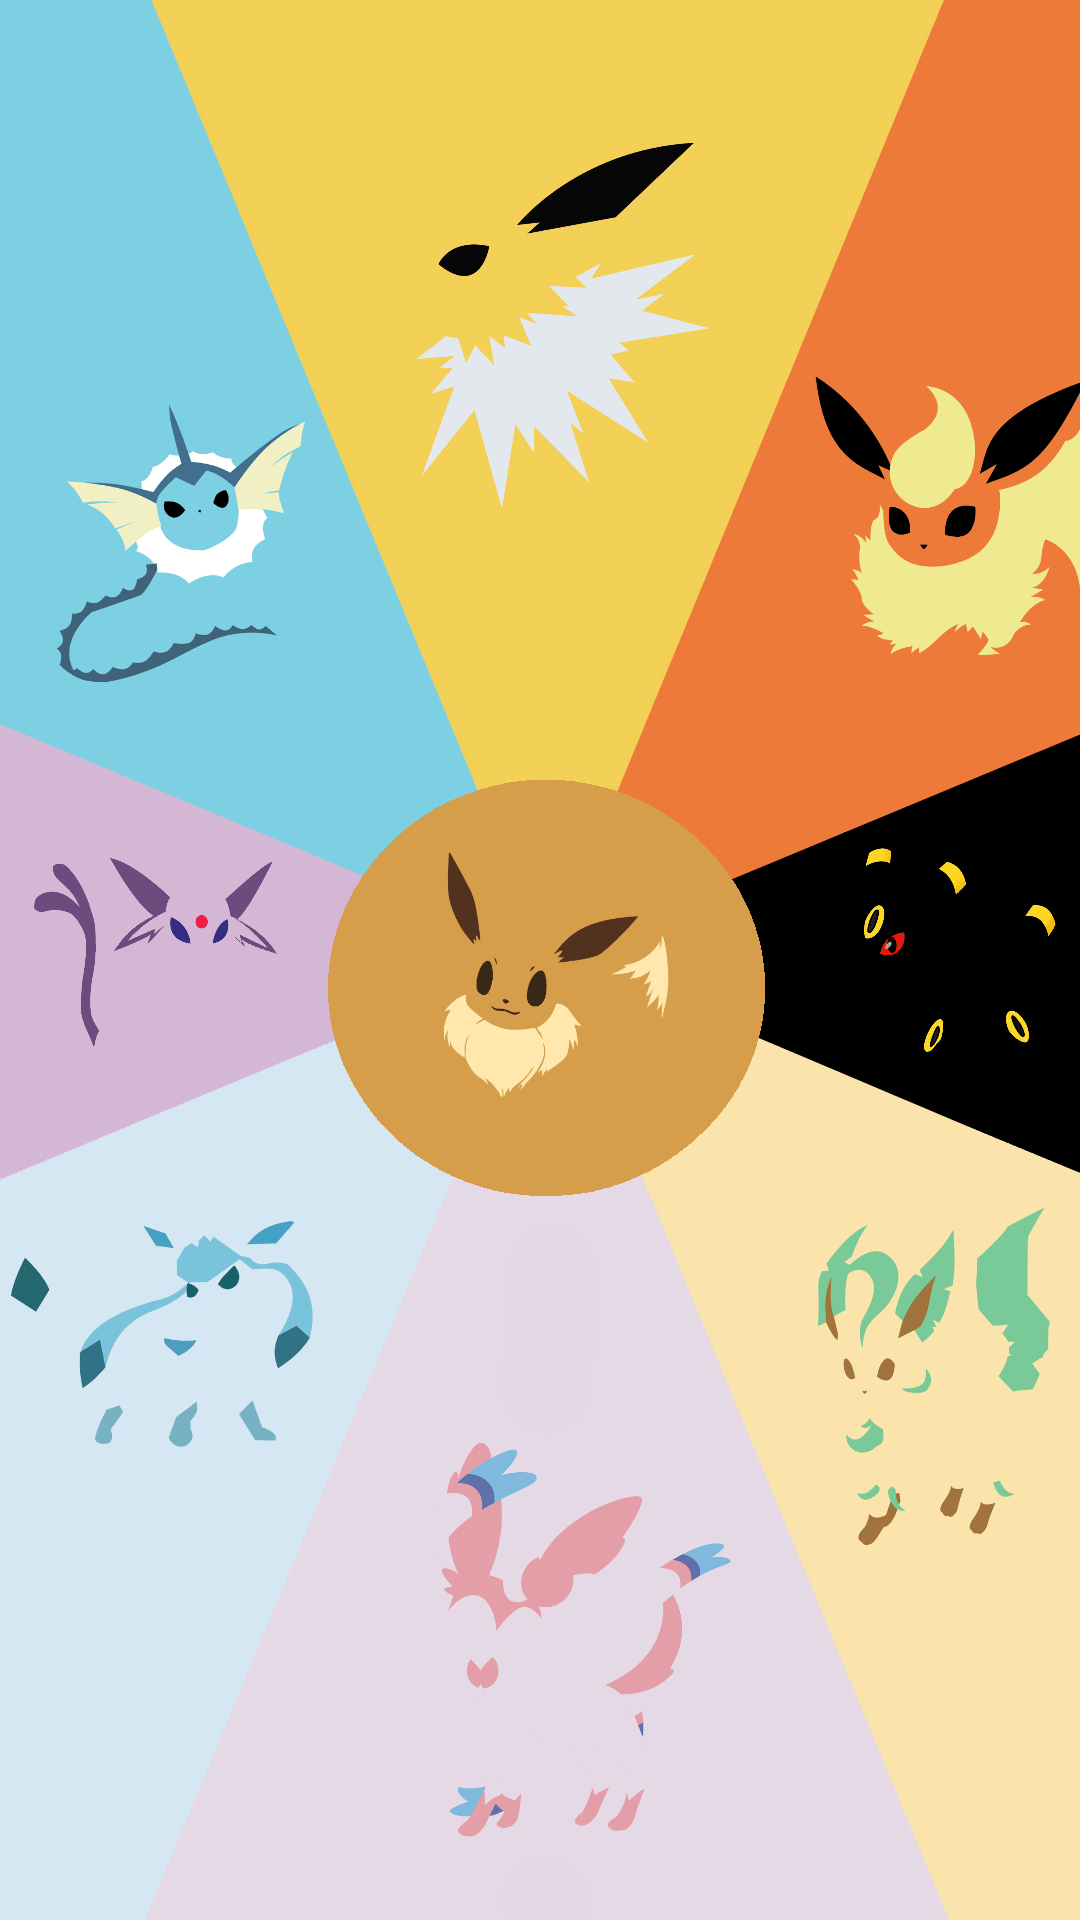 Made a wooper wallpaper for my phone  rpokemon